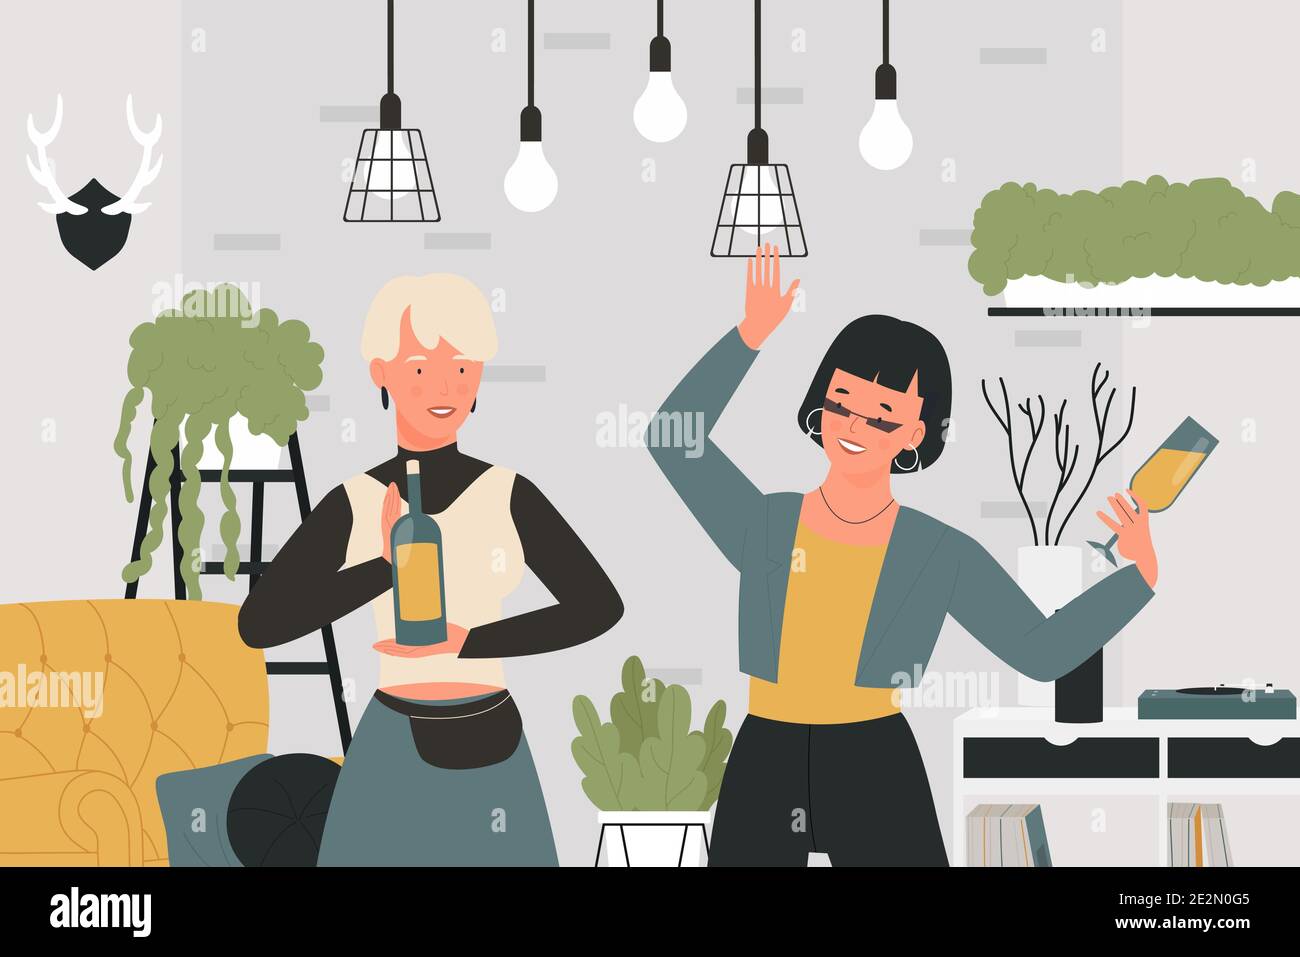 Girls drinking wine vector illustration. Cartoon adult woman characters have fun together at home party in living room interior, two lady friends drink alcohol wine beverage from glasses background Stock Vector